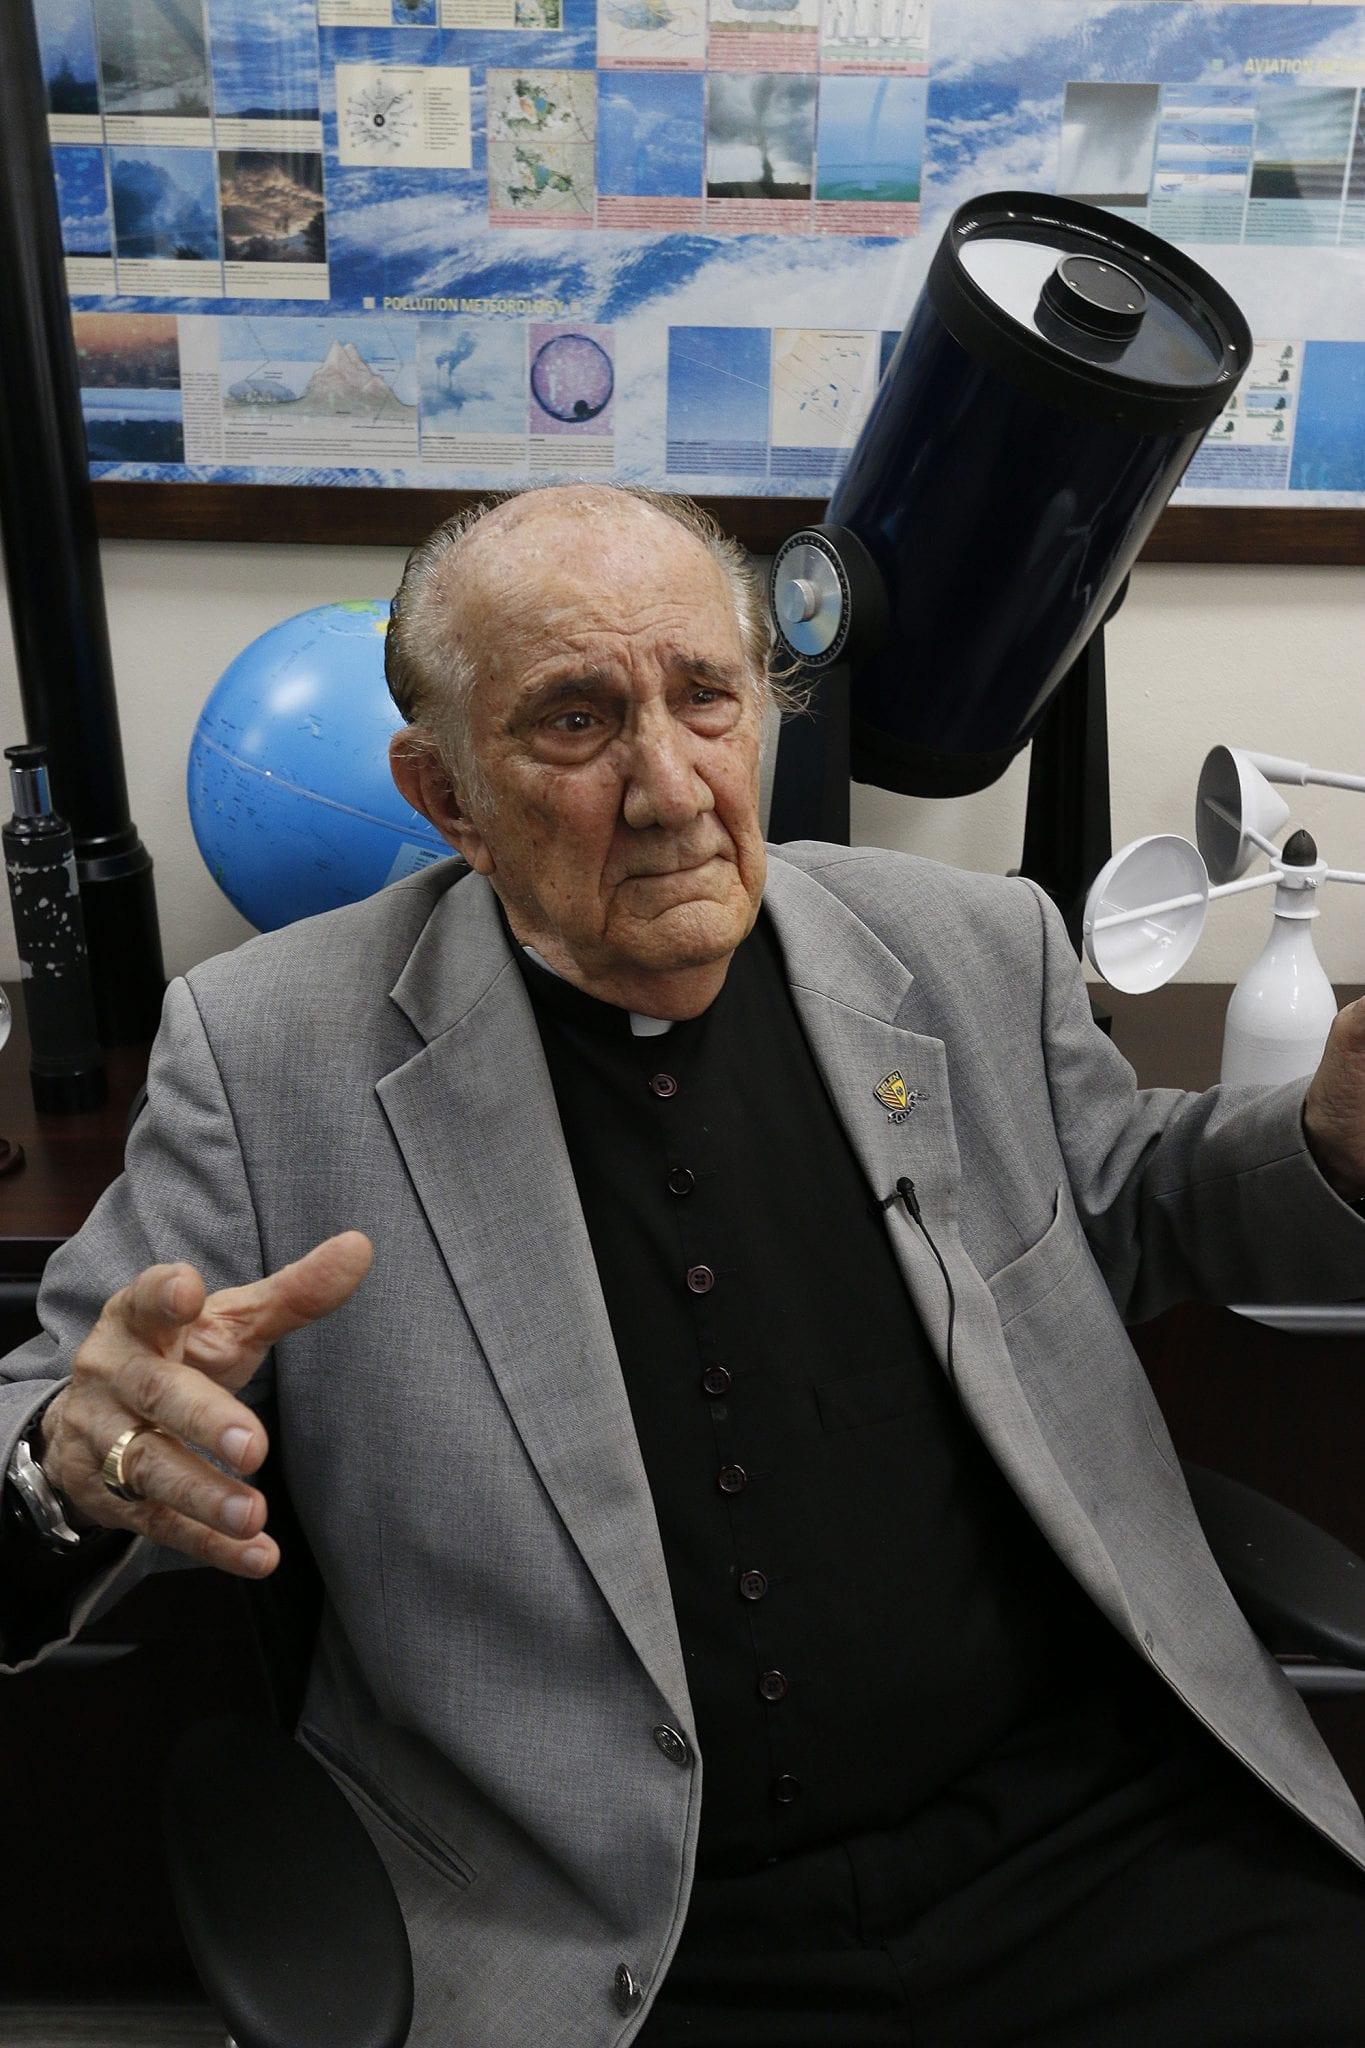 Jesuit priest, longtime astronomy fan, reflects on Apollo 11 anniversary